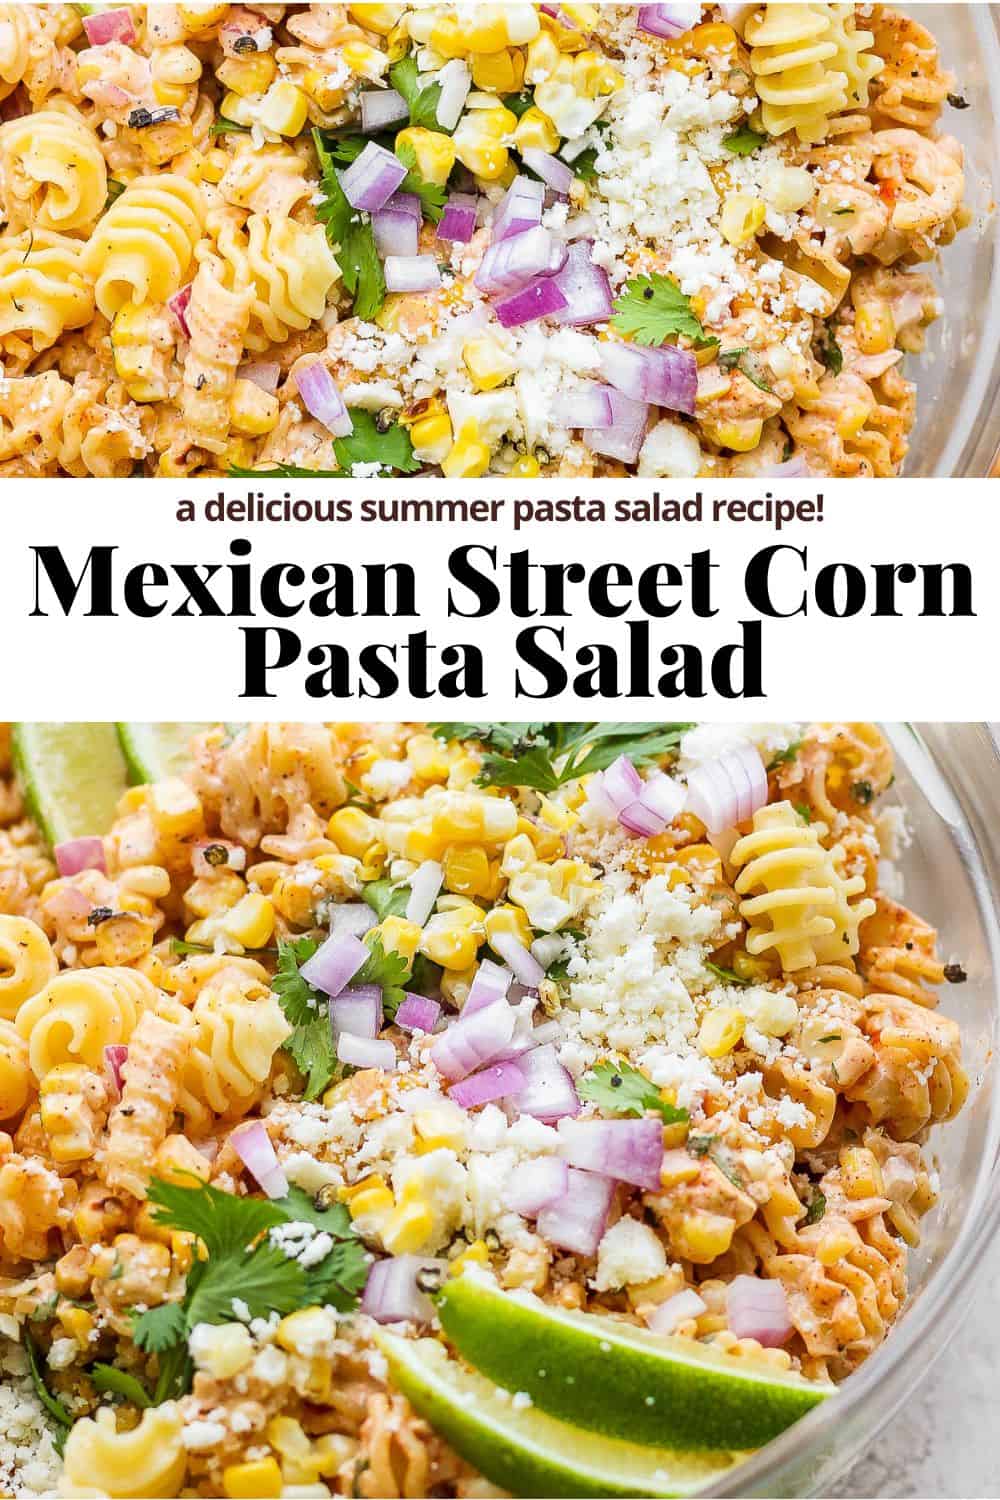 Pinterest image showing the completed mexican street corn pasta salad with the title "a delicious summer pasta salad recipe."